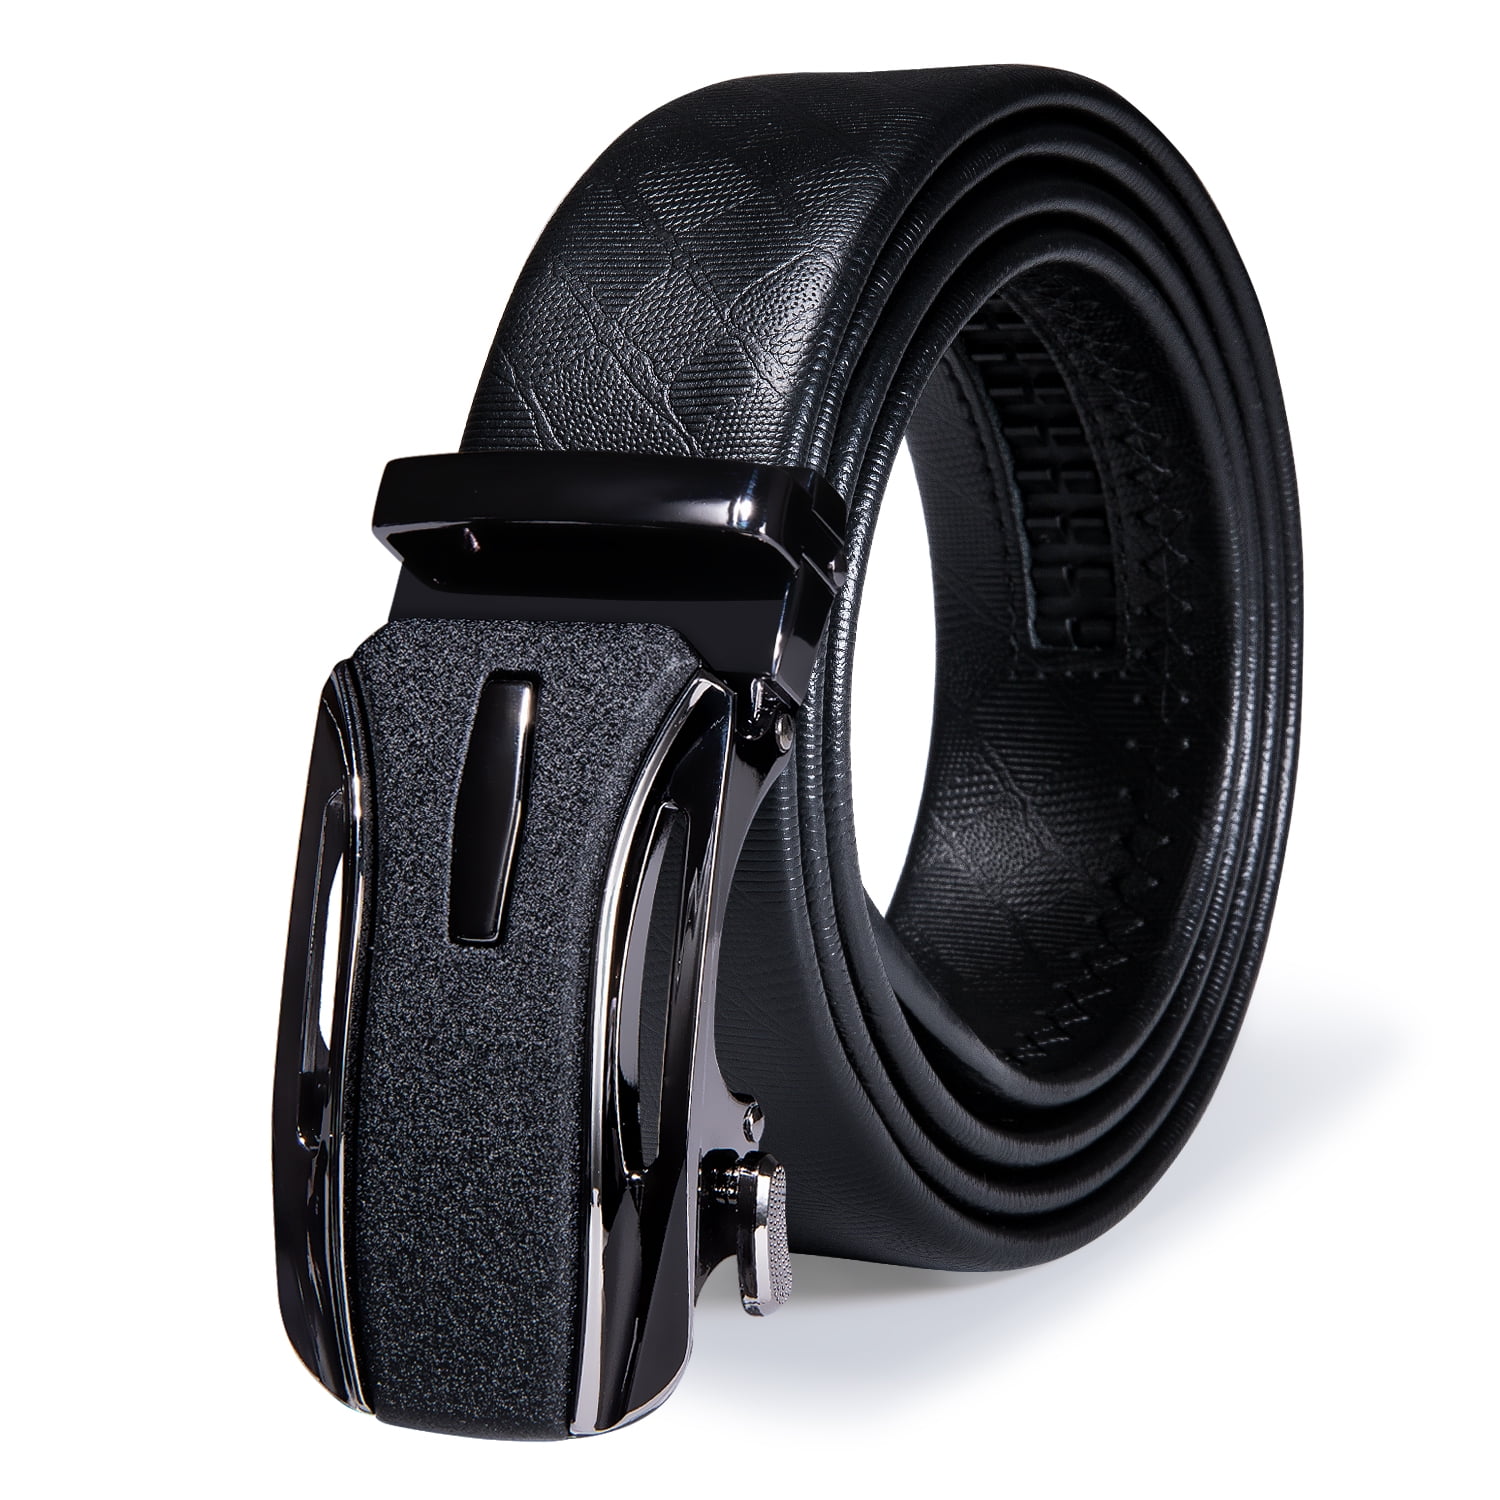 Barry.wang Mens Ratchet Belt,Genuine Leather Belt with Automatic Buckle Alloy,Gift Set for Men